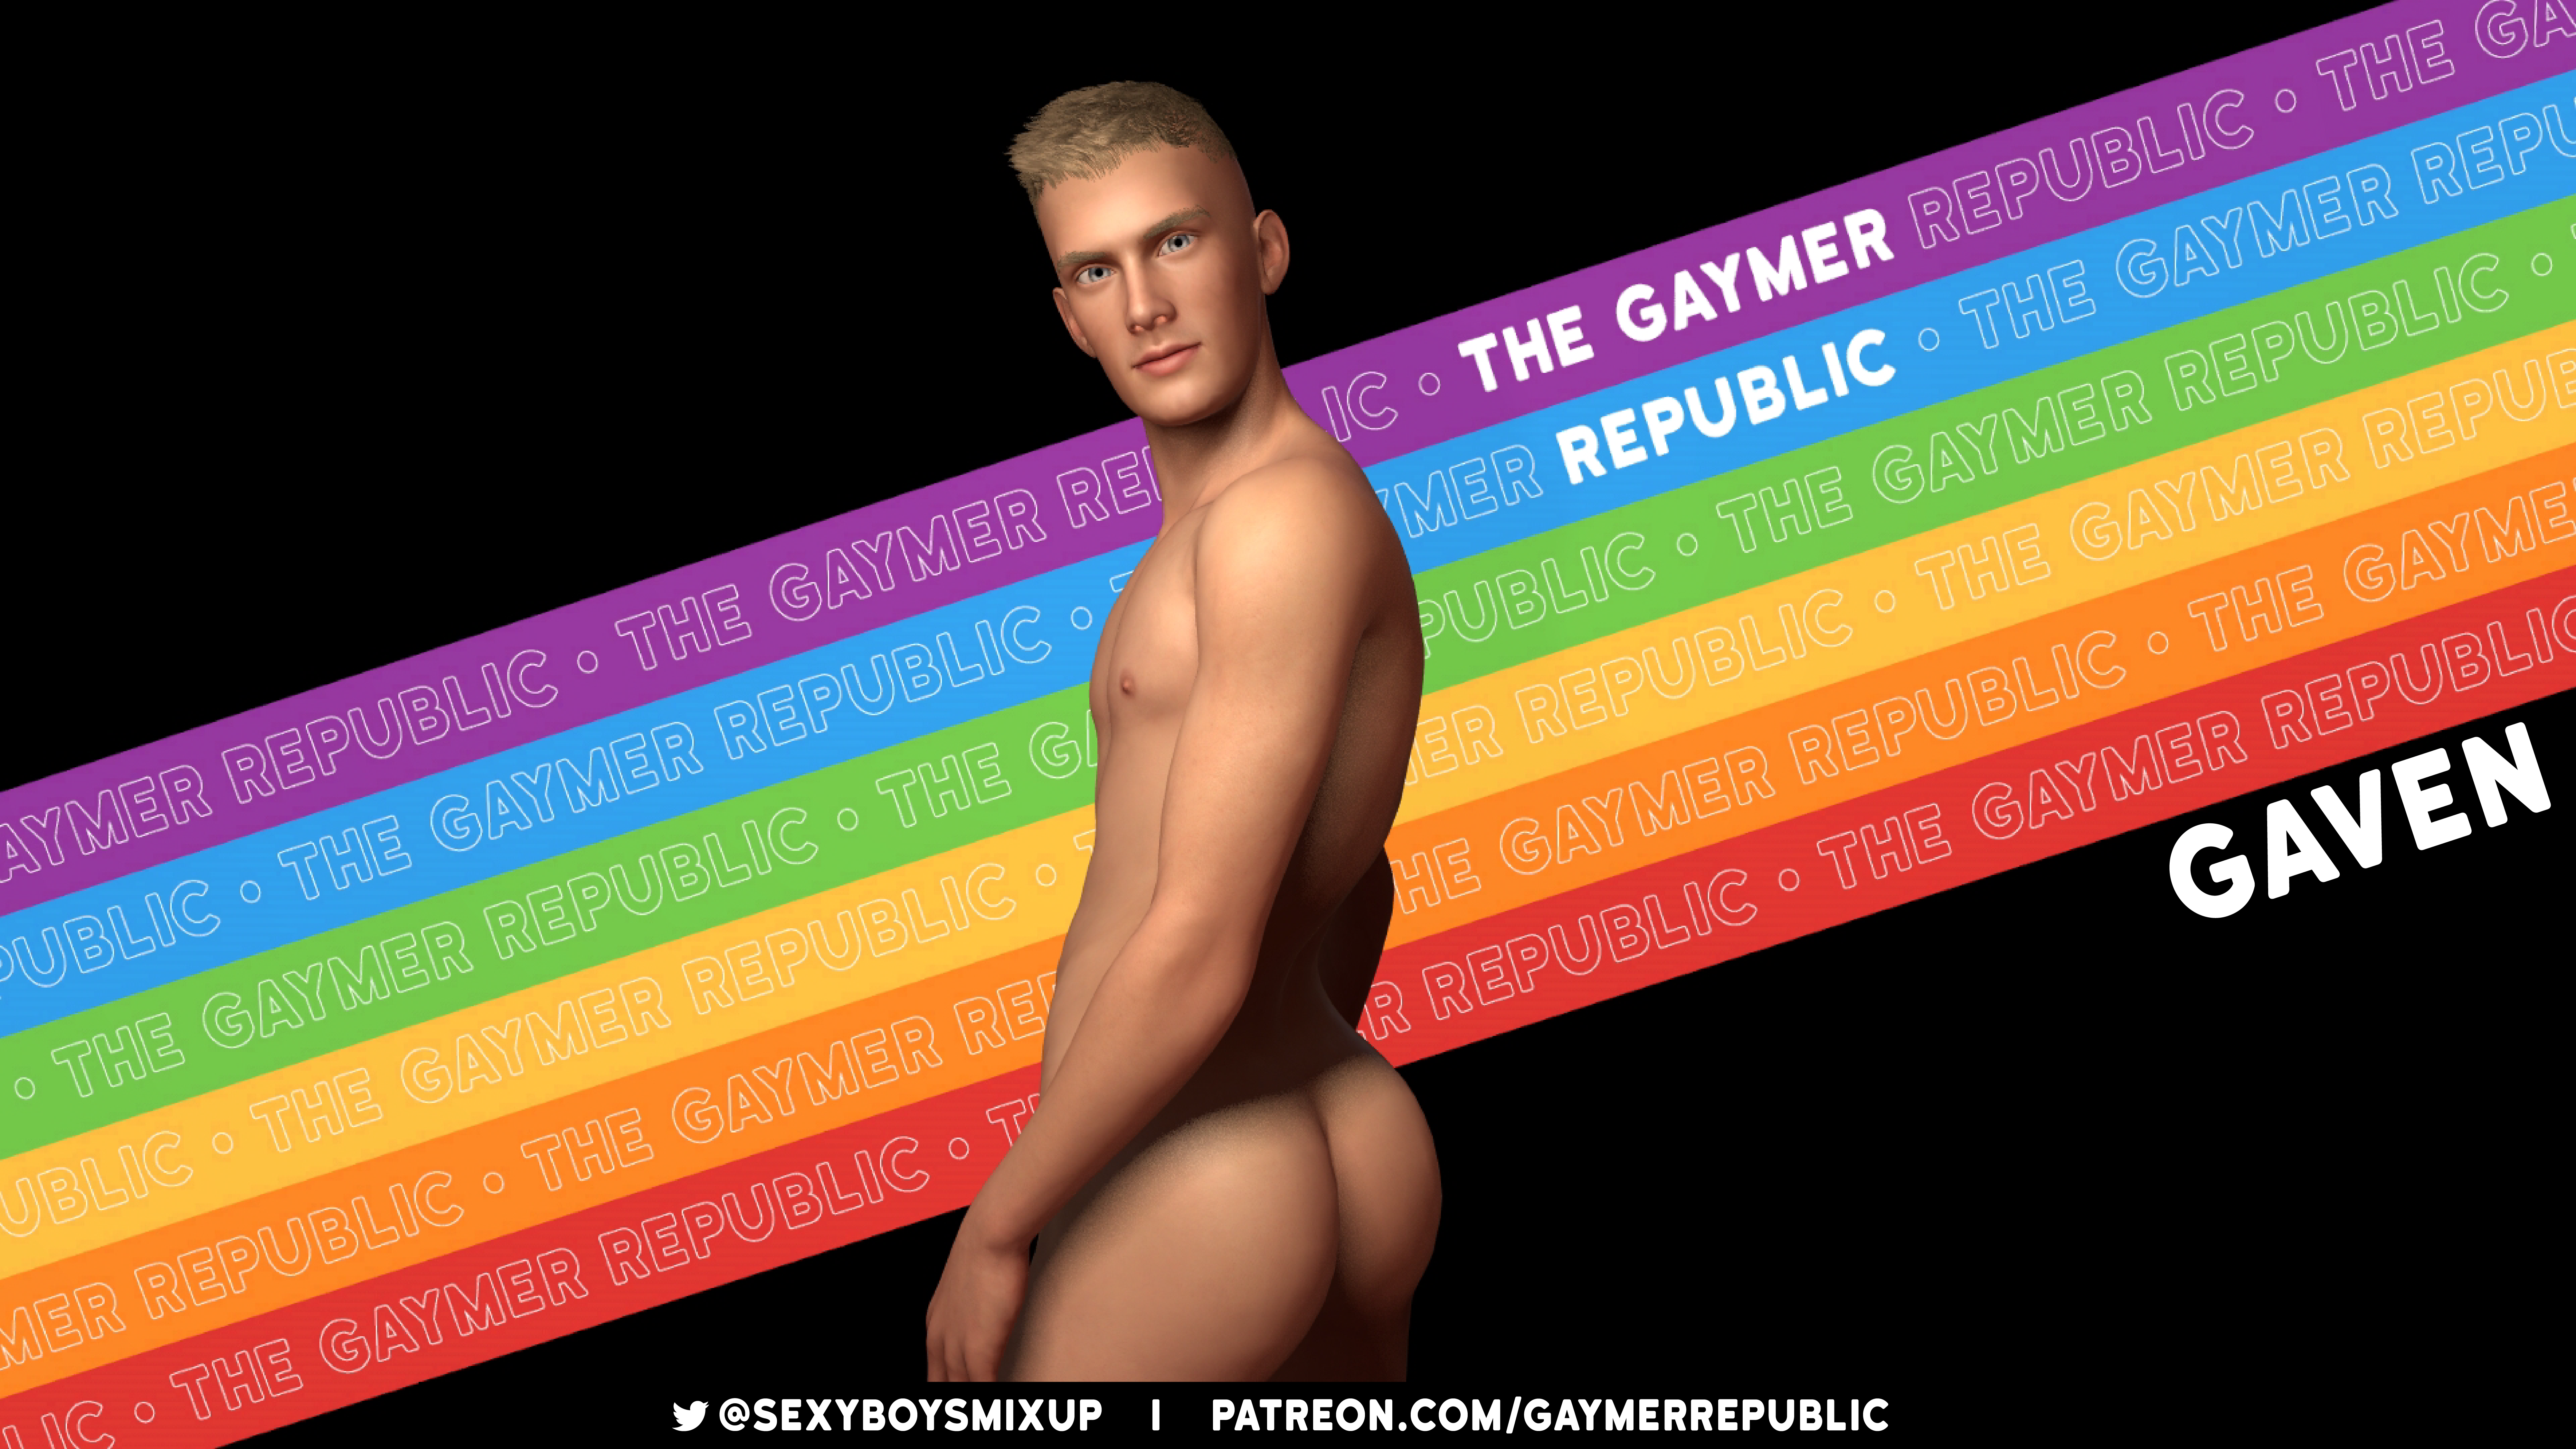 Gaven_003.png